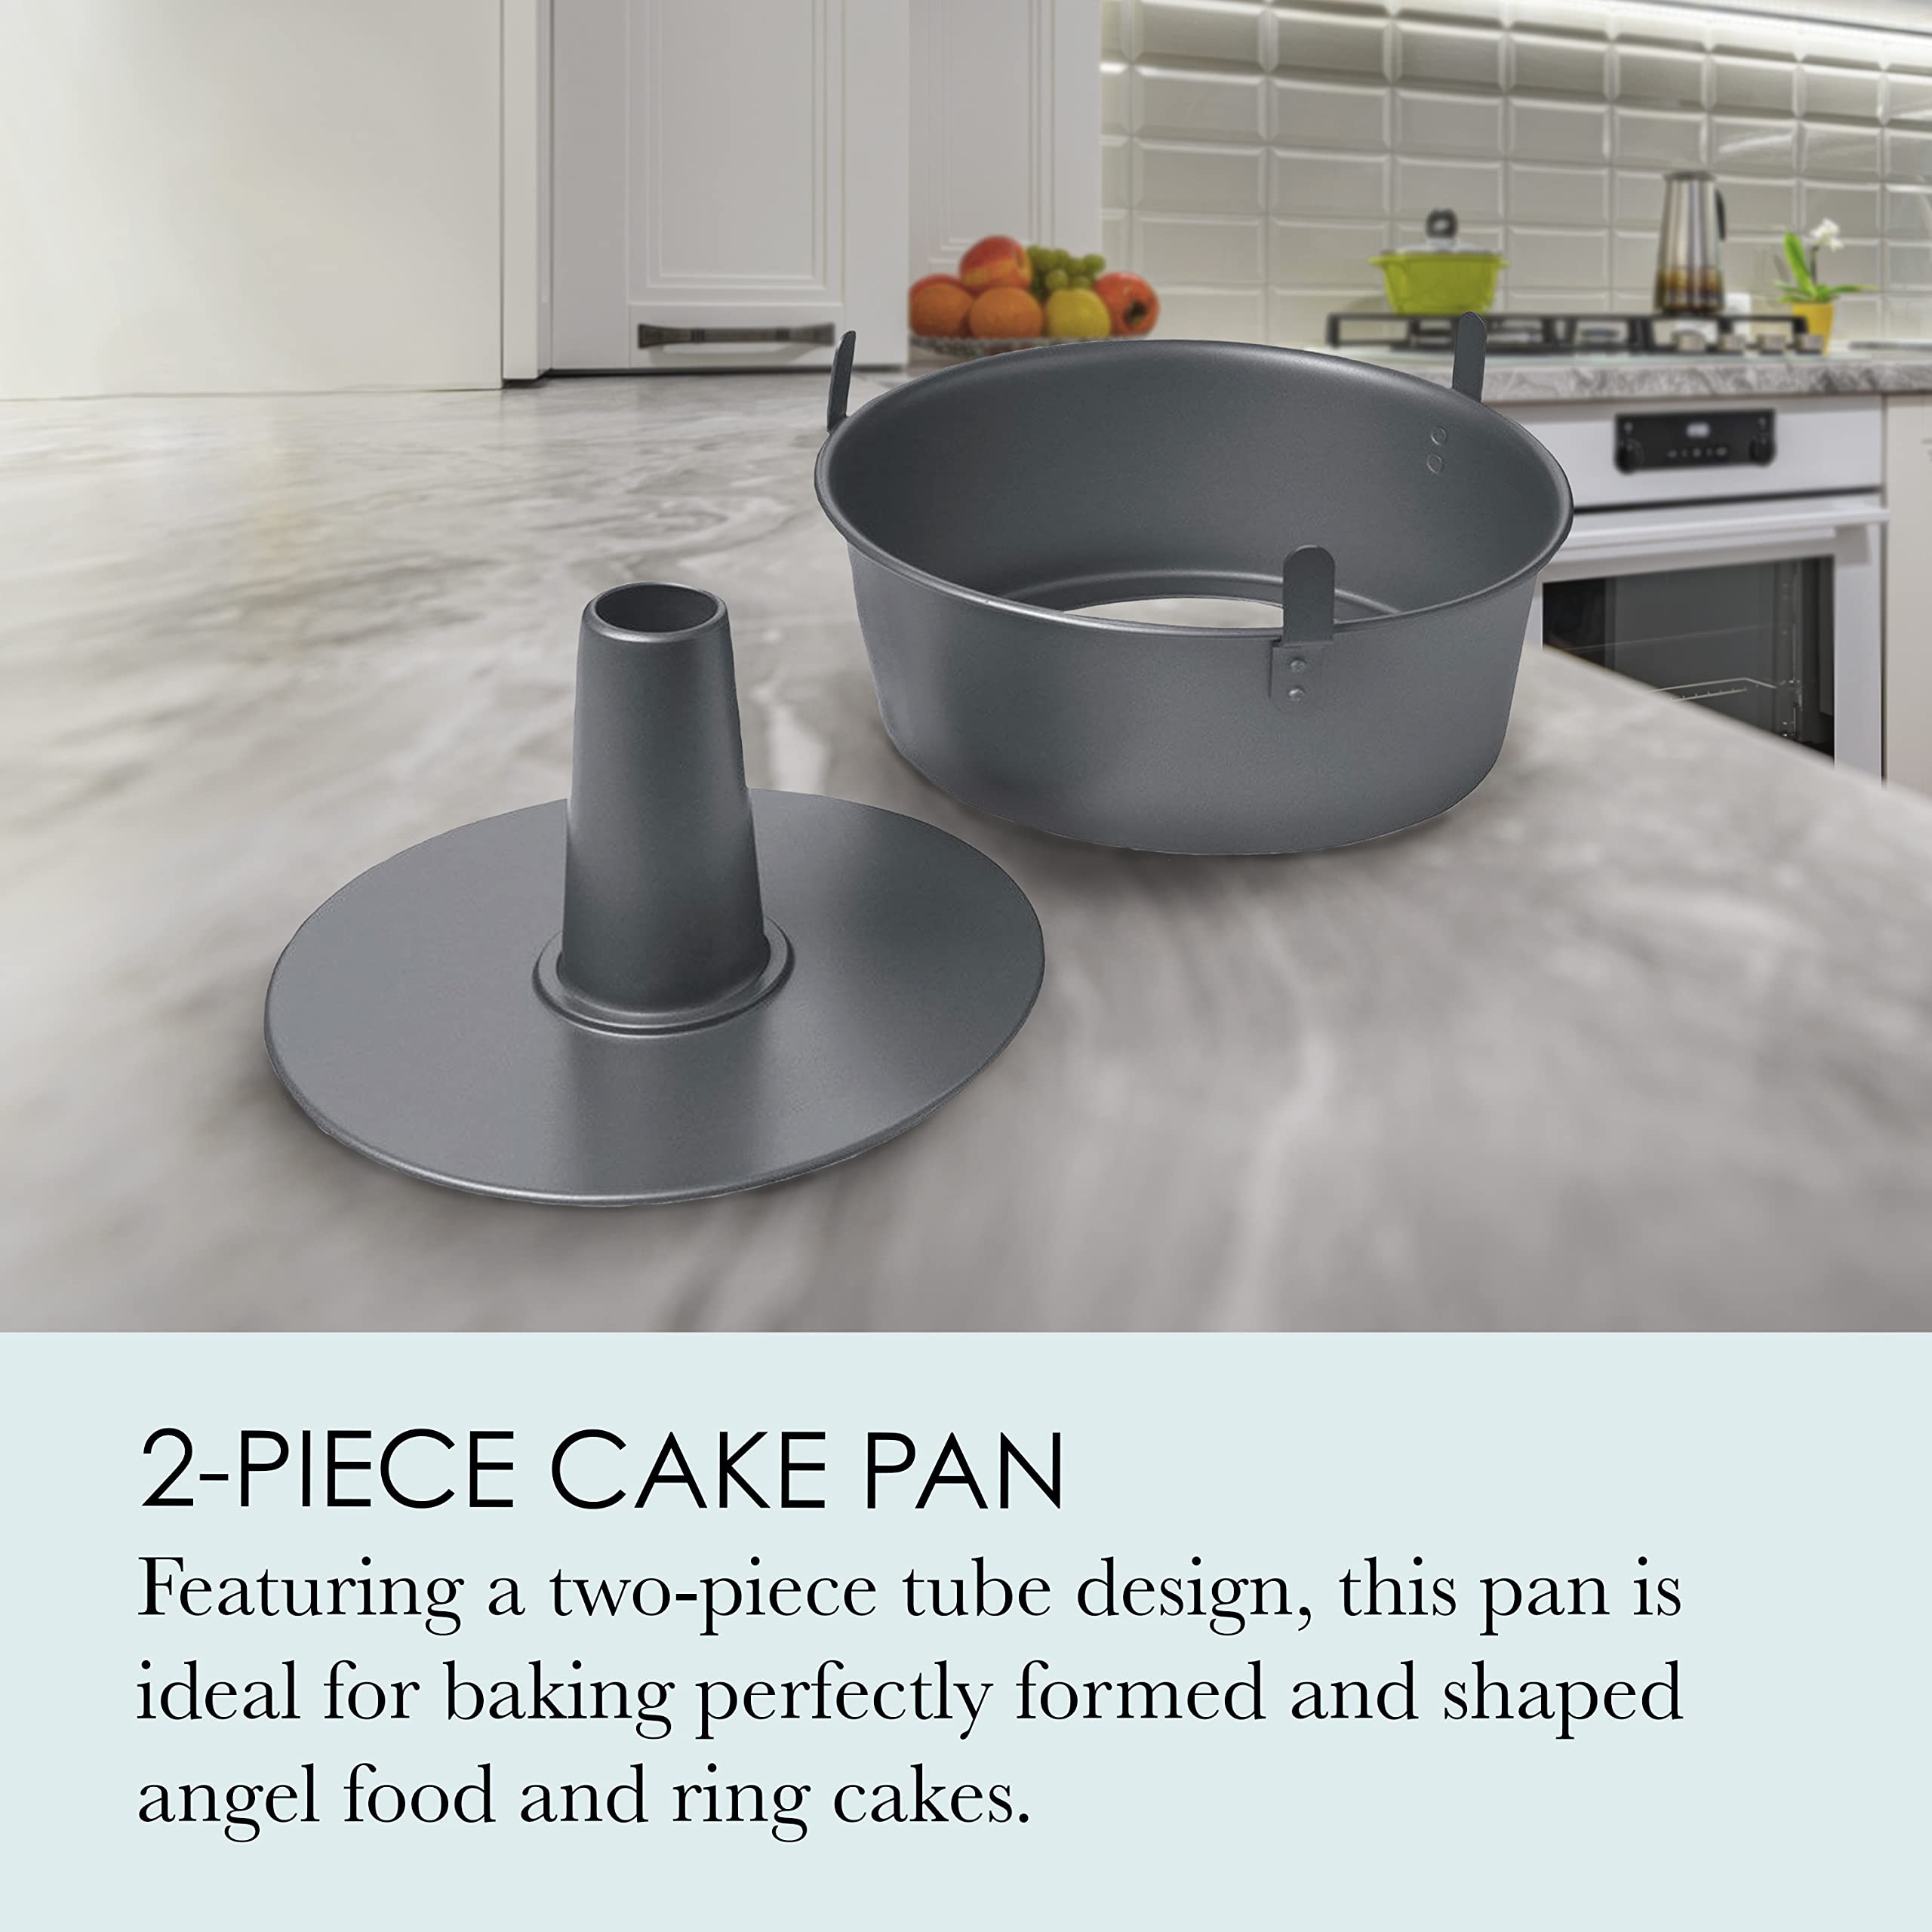 Chicago Metallic Professional 2-Piece 9.5-Inch Angel Food Cake Pan with Feet, 9.5